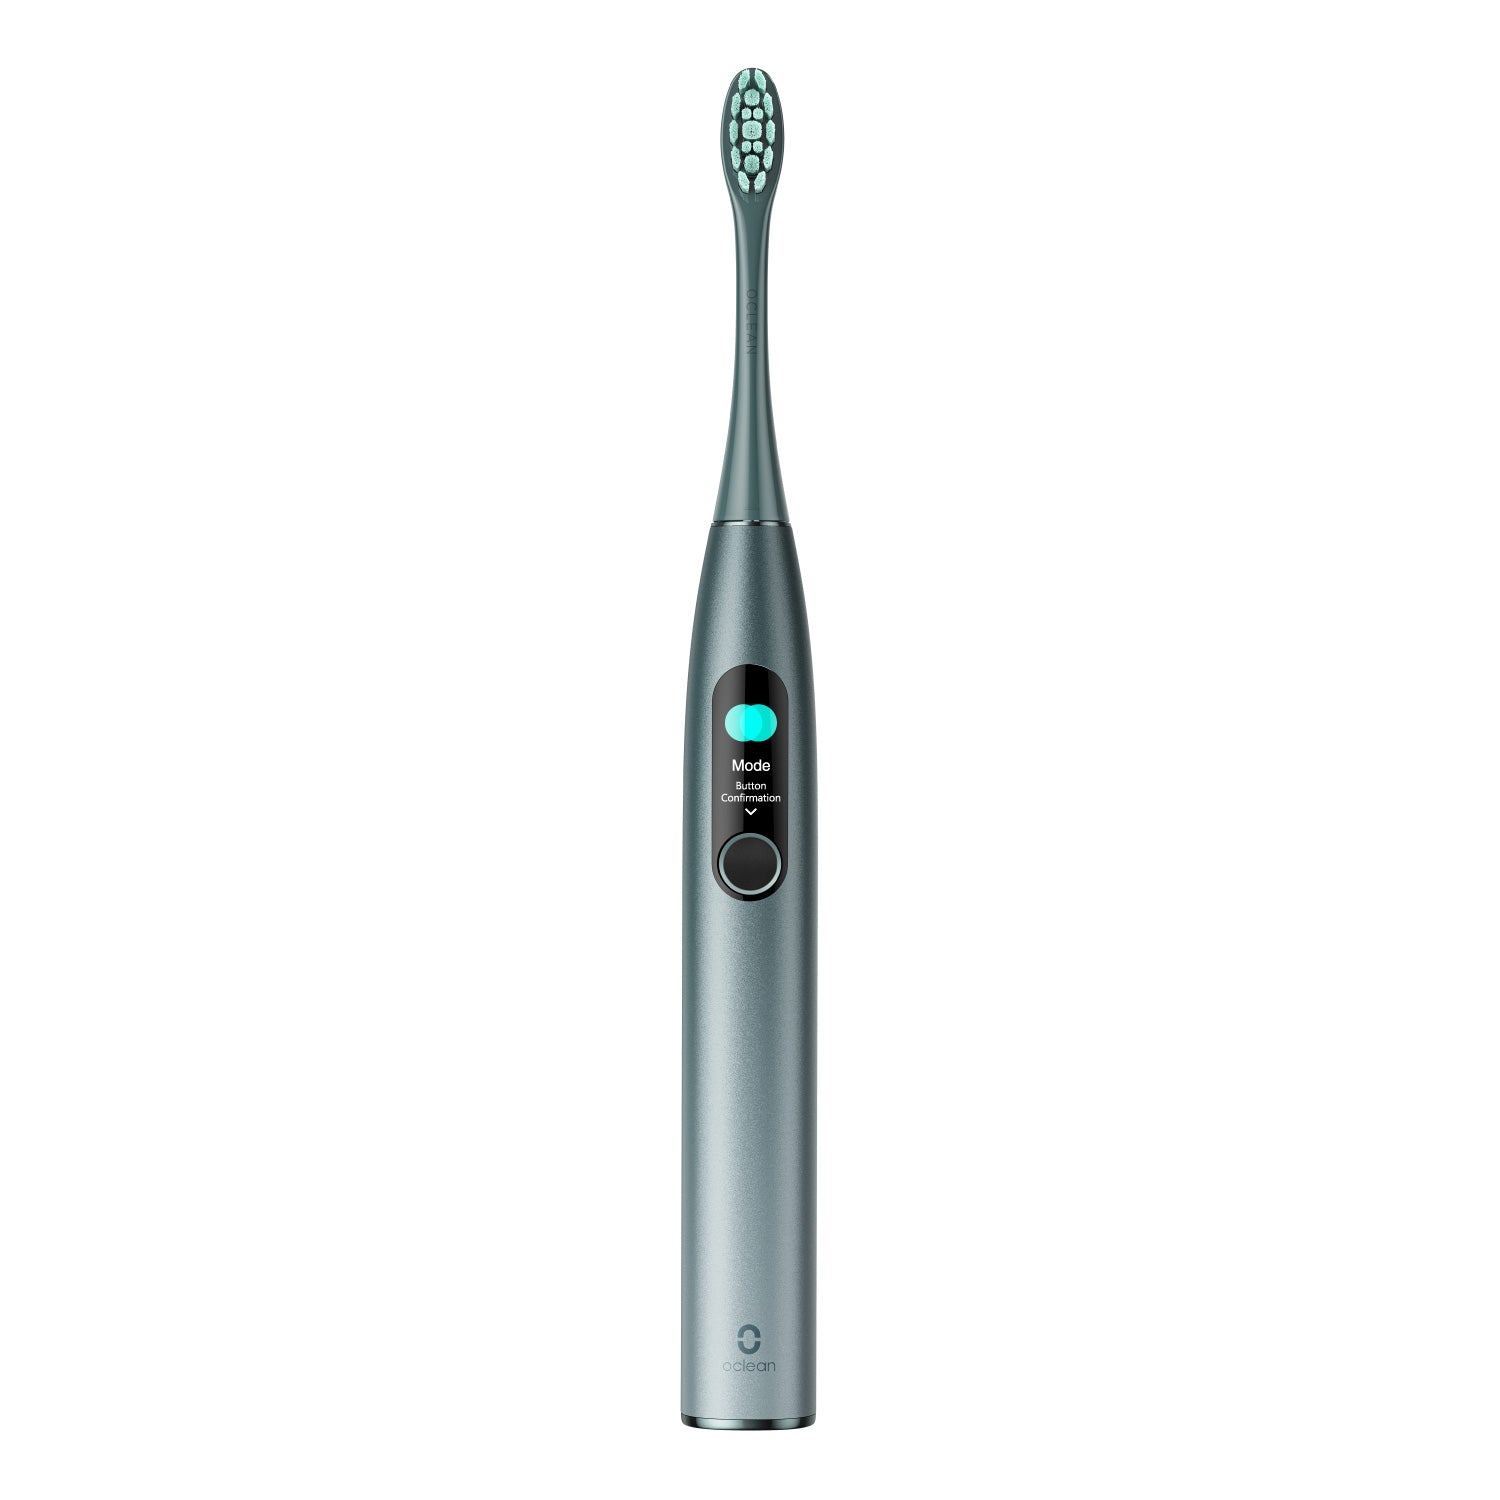 Oclean X Pro Smart Sonic Electric Toothbrush-Toothbrushes-Oclean US Store